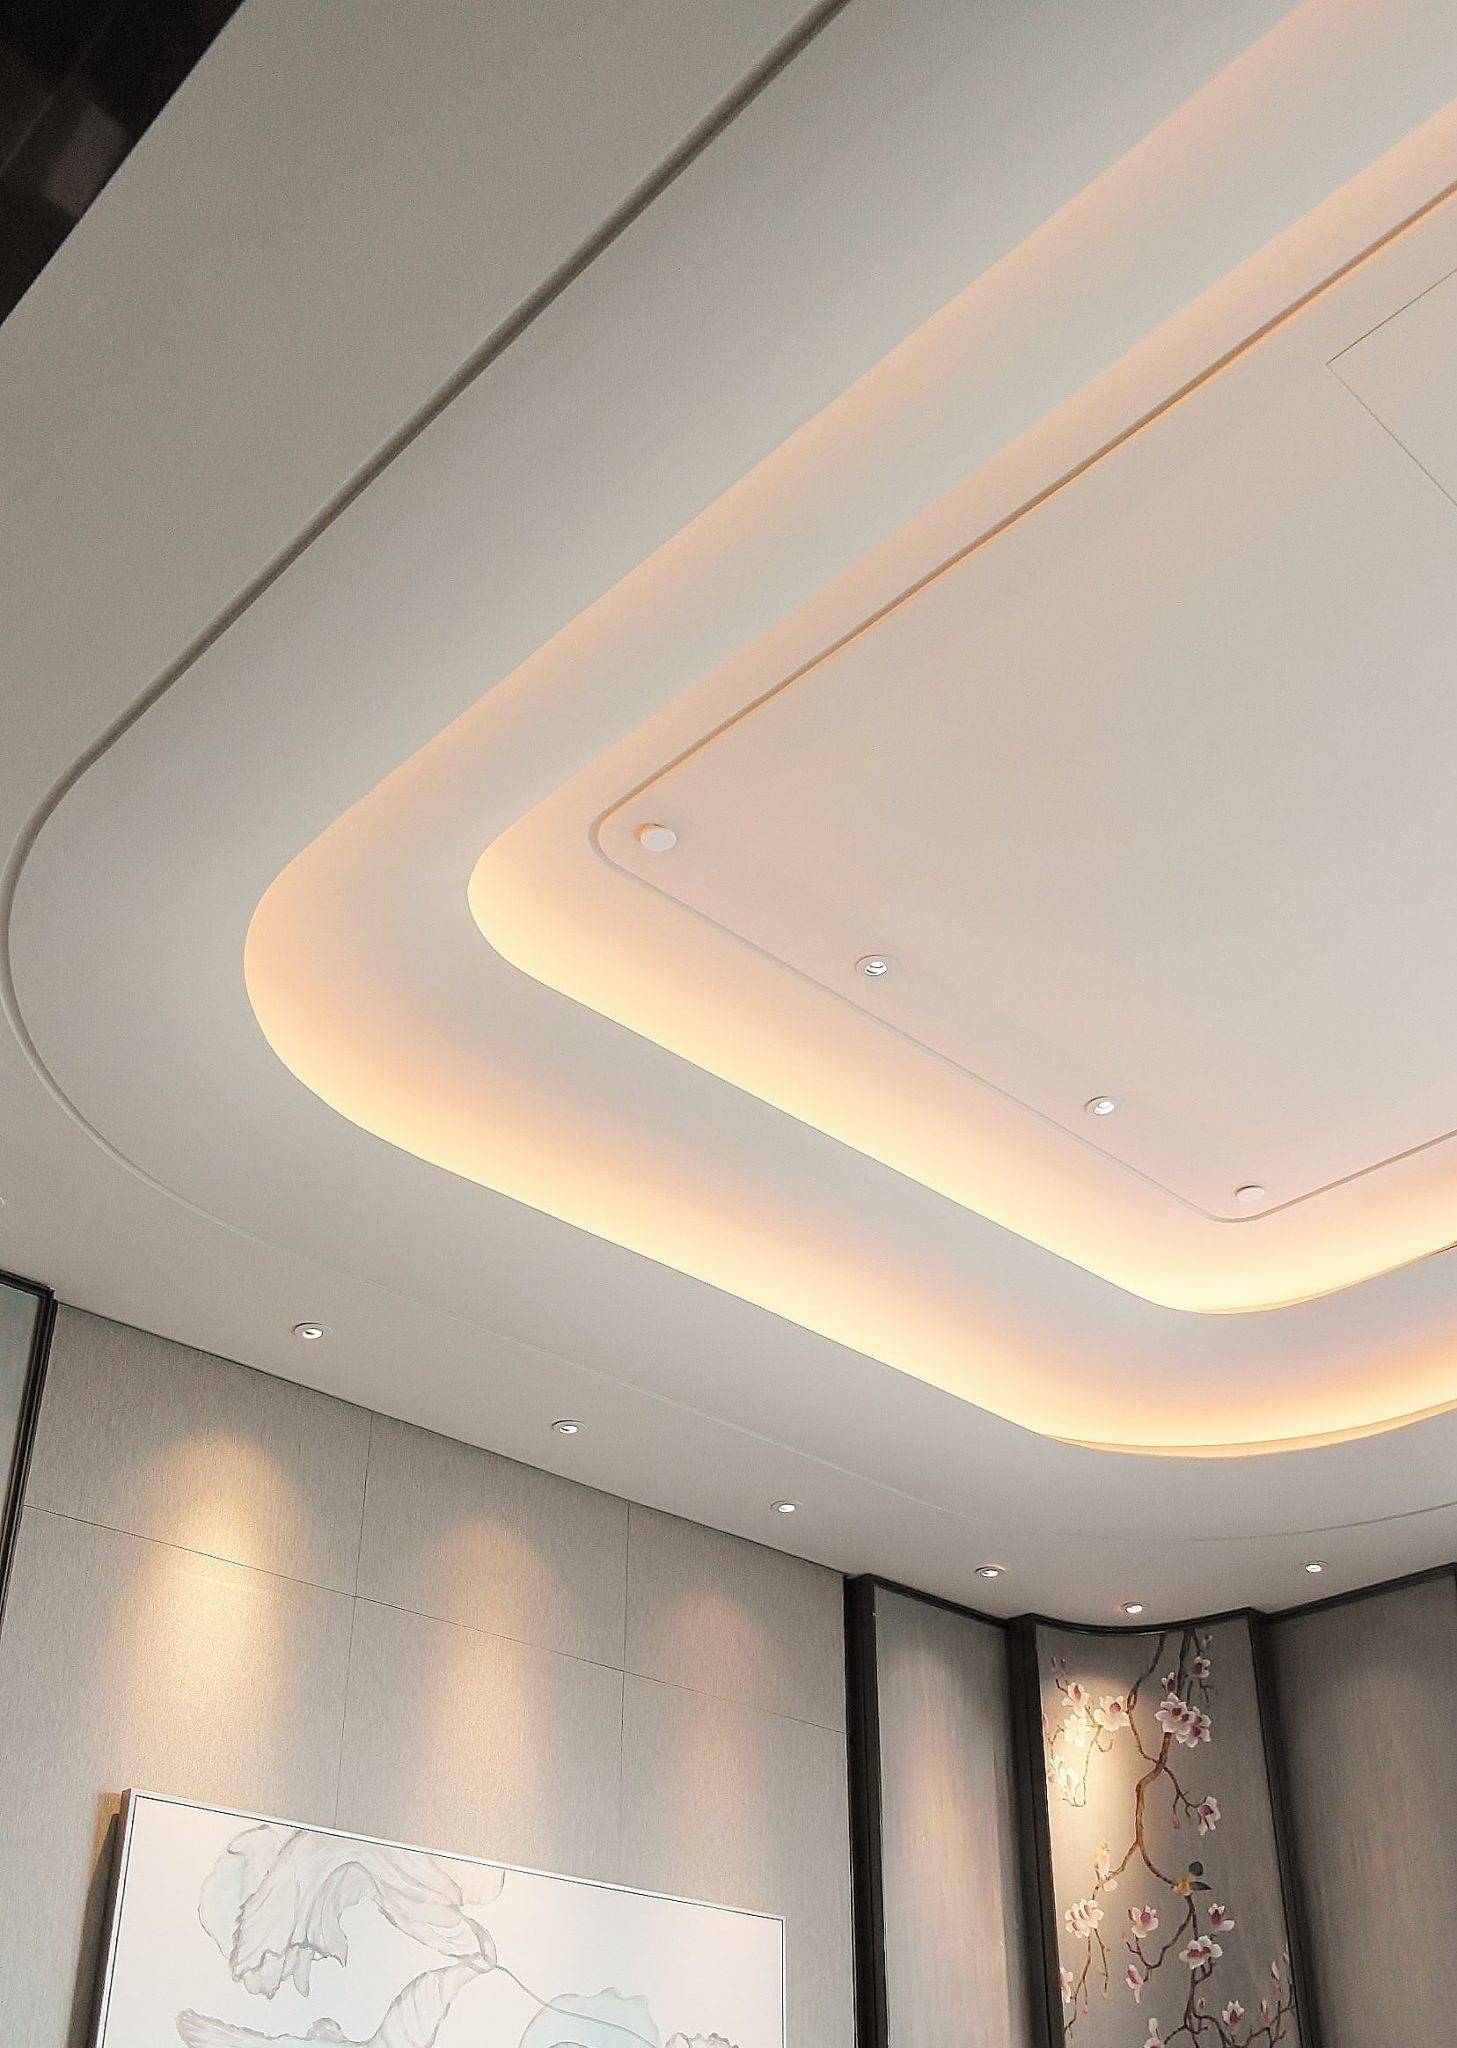 Ceiling Or False Ceiling Design with Unique Styles, Order your One